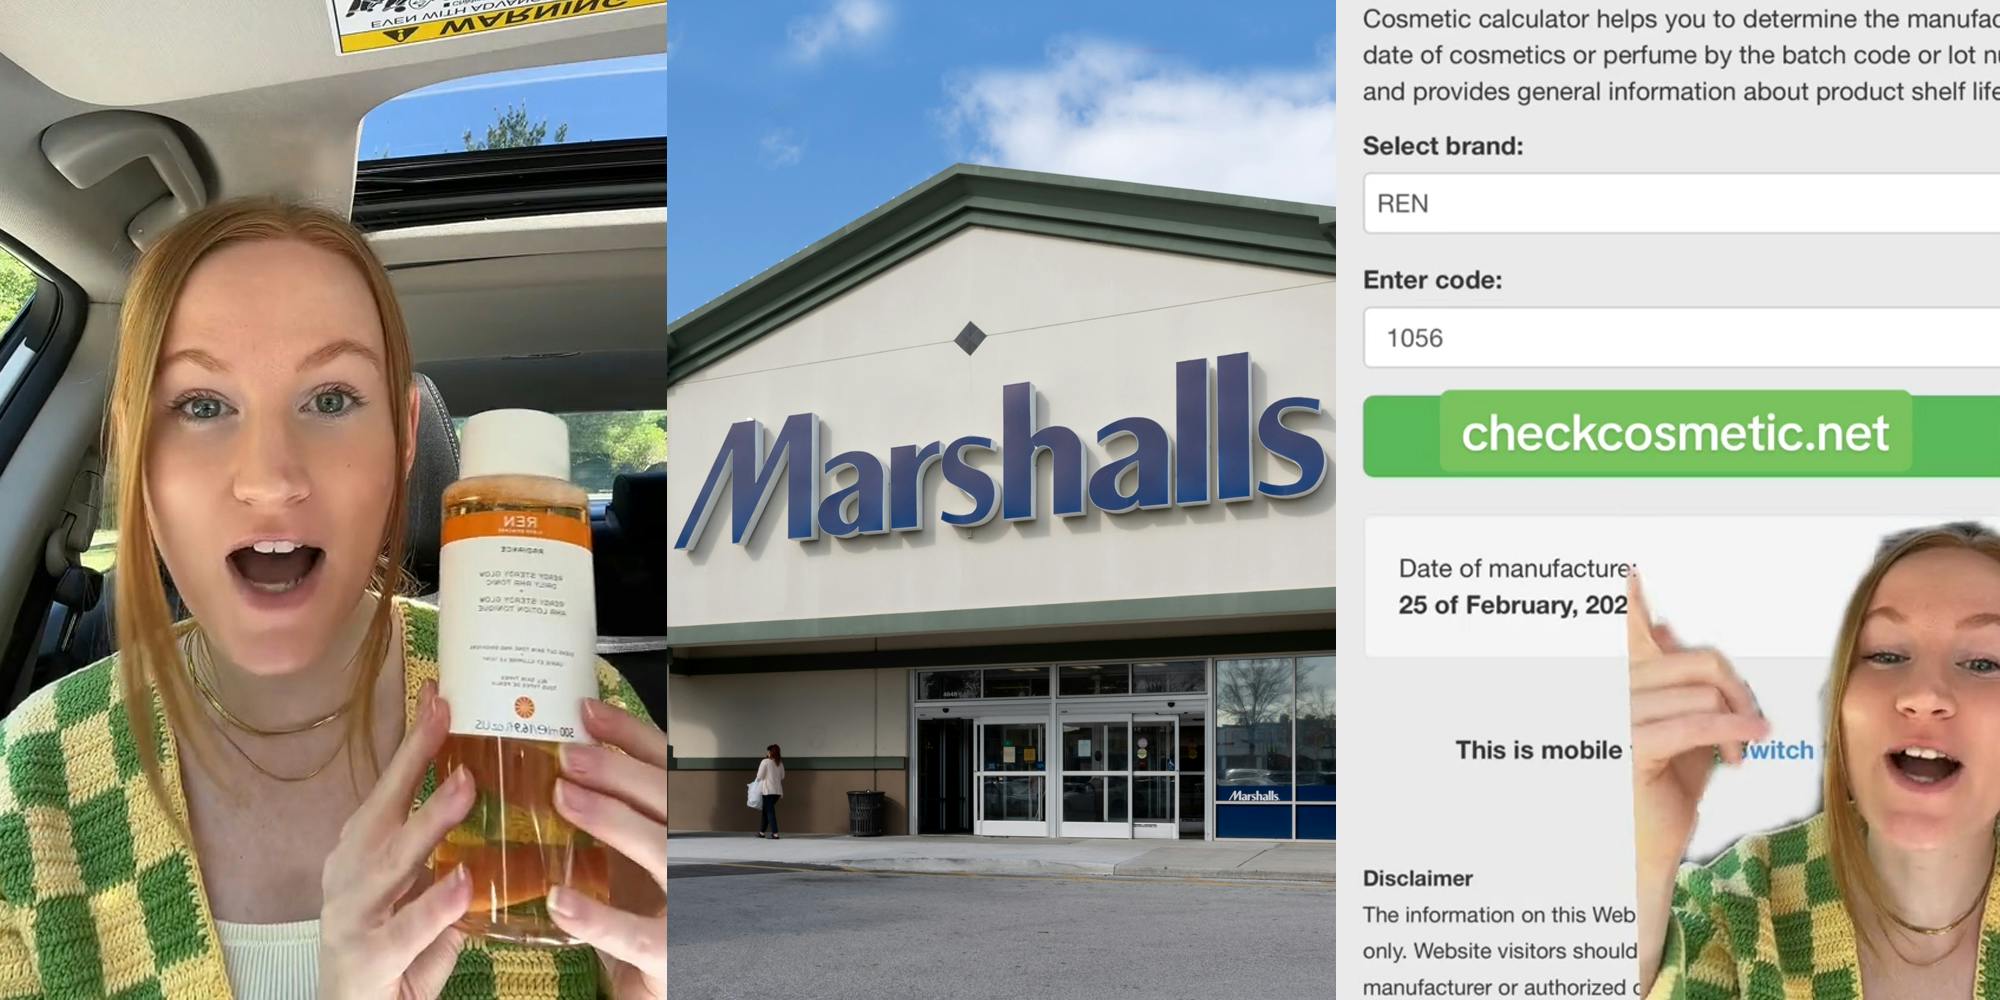 Marshalls customer speaking in car holding skincare product (l) Marshalls building with sign (c) Marshalls customer greenscreen TikTok over cosmetic calculator with caption "checkcosmetic.net" (r)